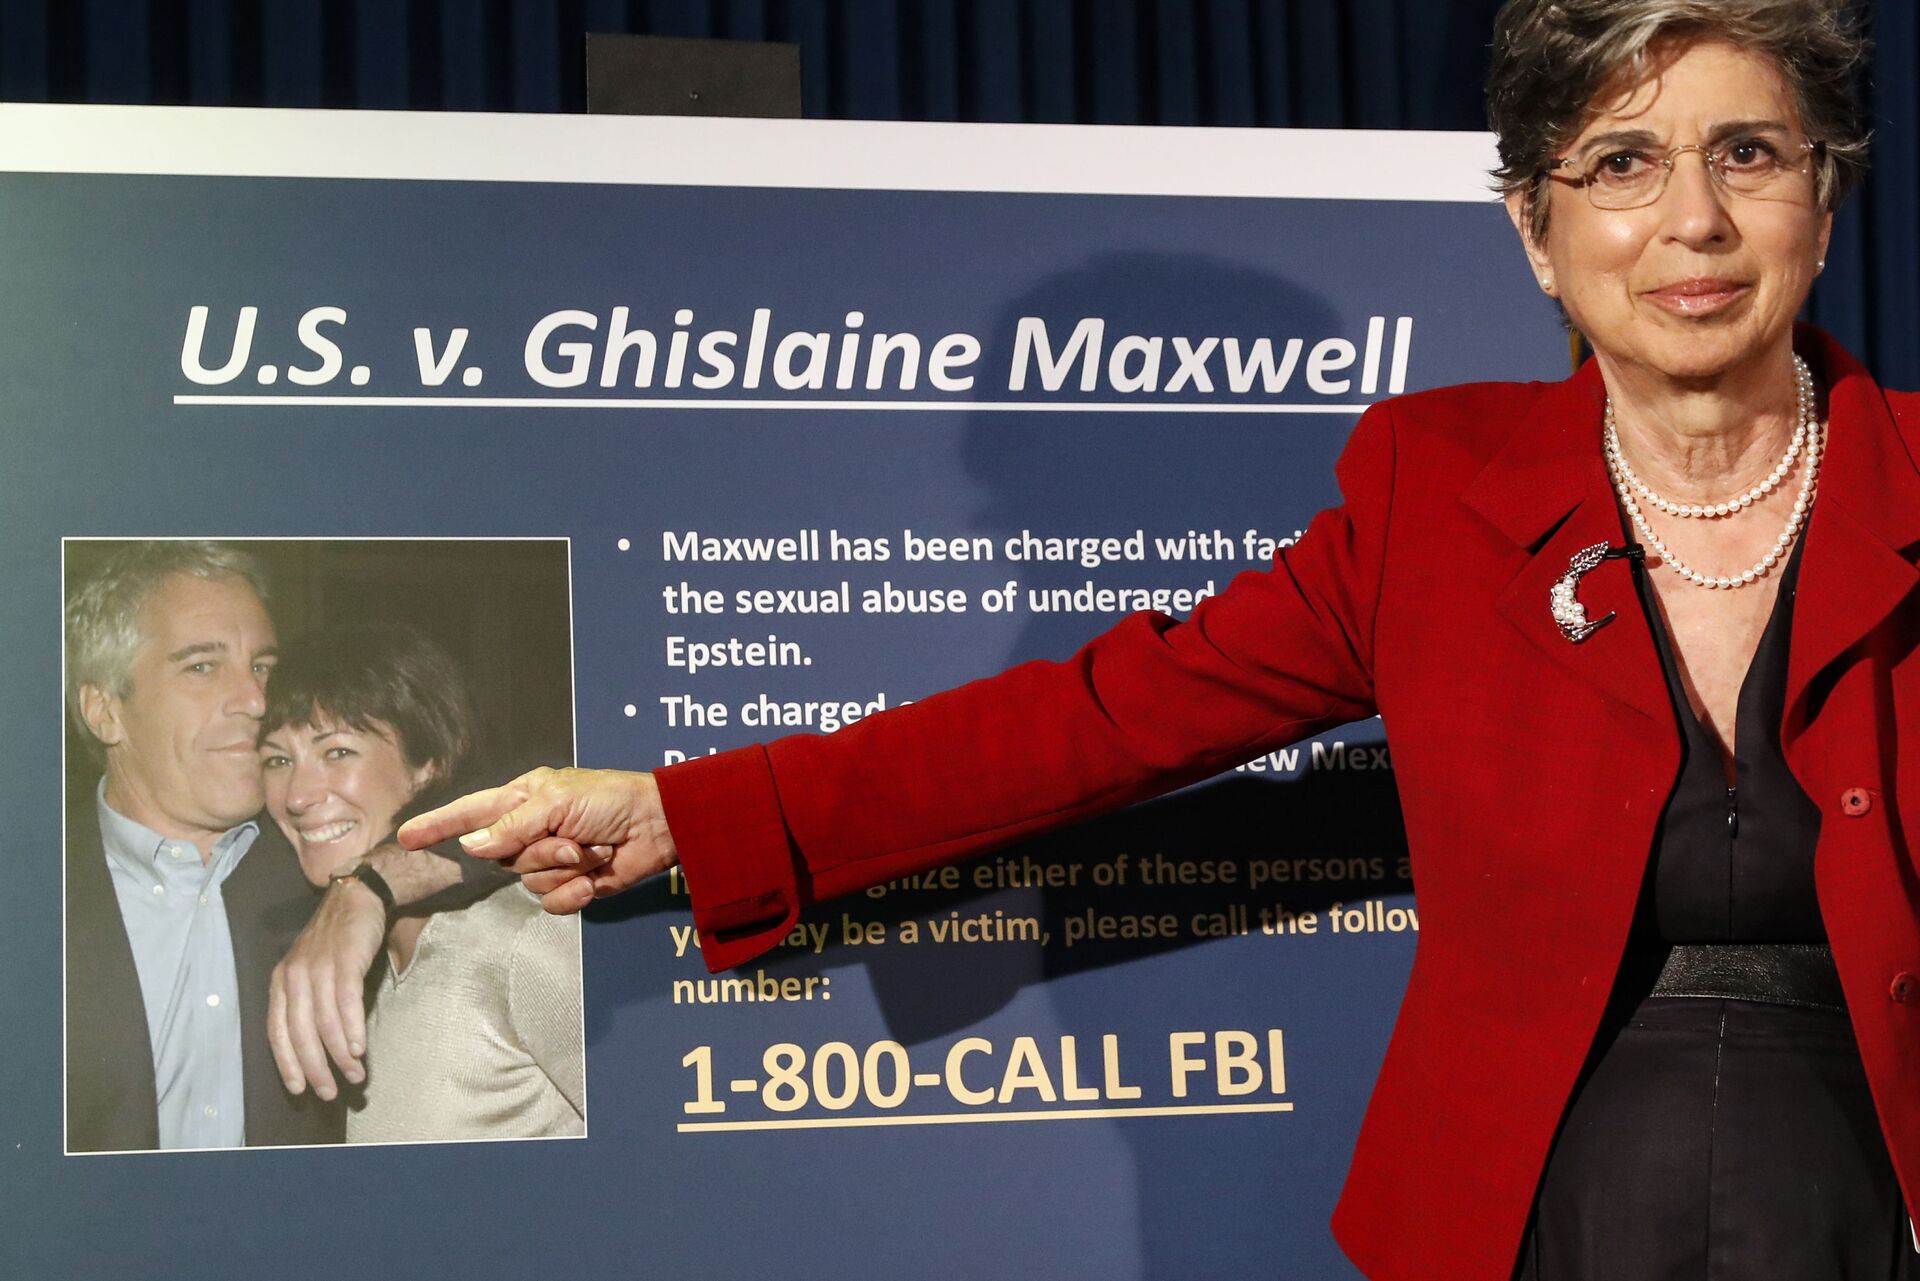 In this Thursday, July 2, 2020, file photo, Audrey Strauss, Acting United States Attorney for the Southern District of New York, gestures as she speaks during a news conference to announce charges against Ghislaine Maxwell for her alleged role in the sexual exploitation and abuse of multiple minor girls by Jeffrey Epstein, in New York - Sputnik International, 1920, 21.10.2021